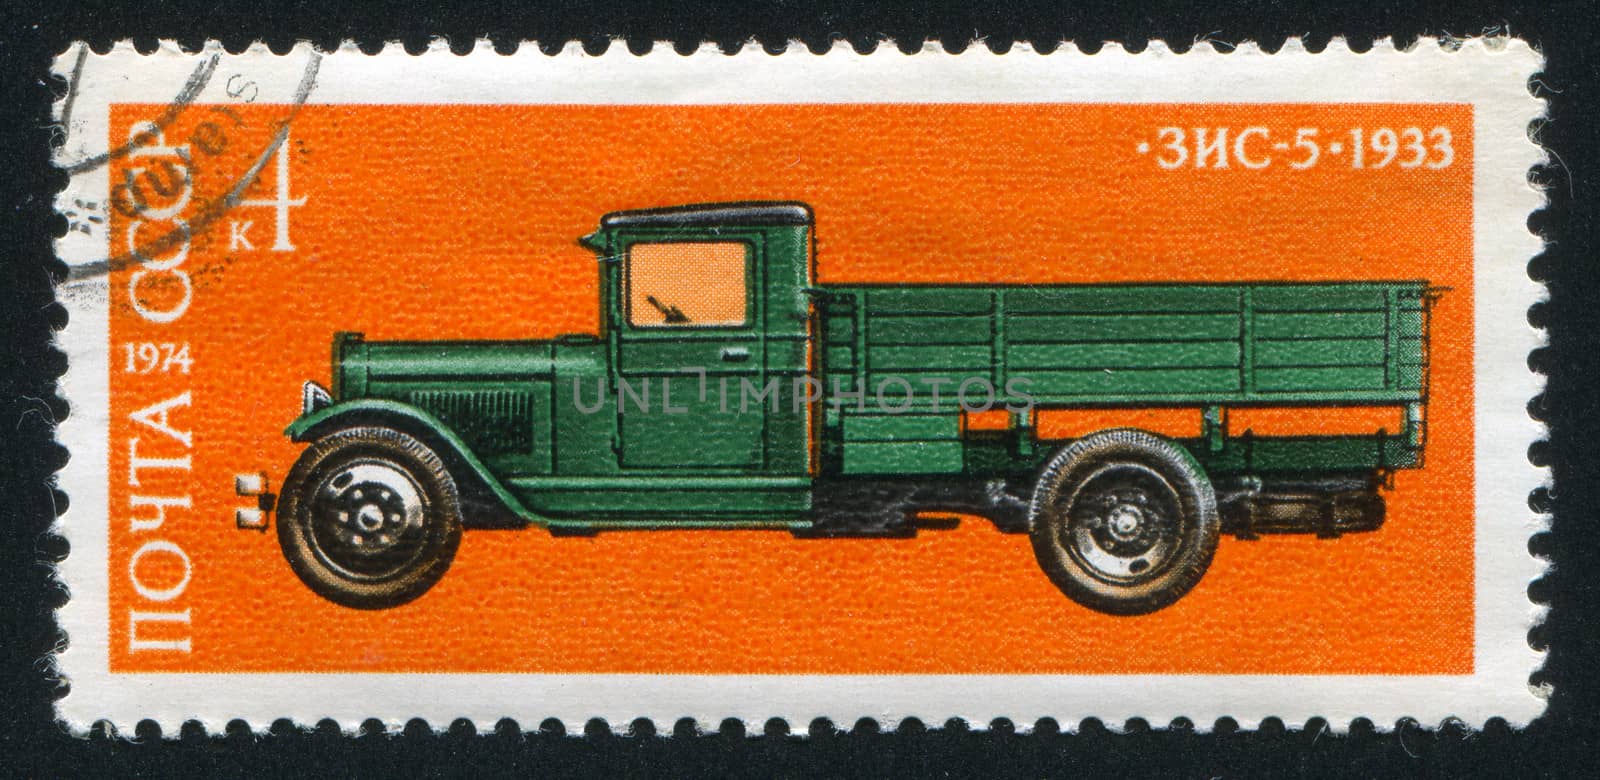 RUSSIA - CIRCA 1974: stamp printed by Russia, shows Zis 5 truck, 1933, circa 1974